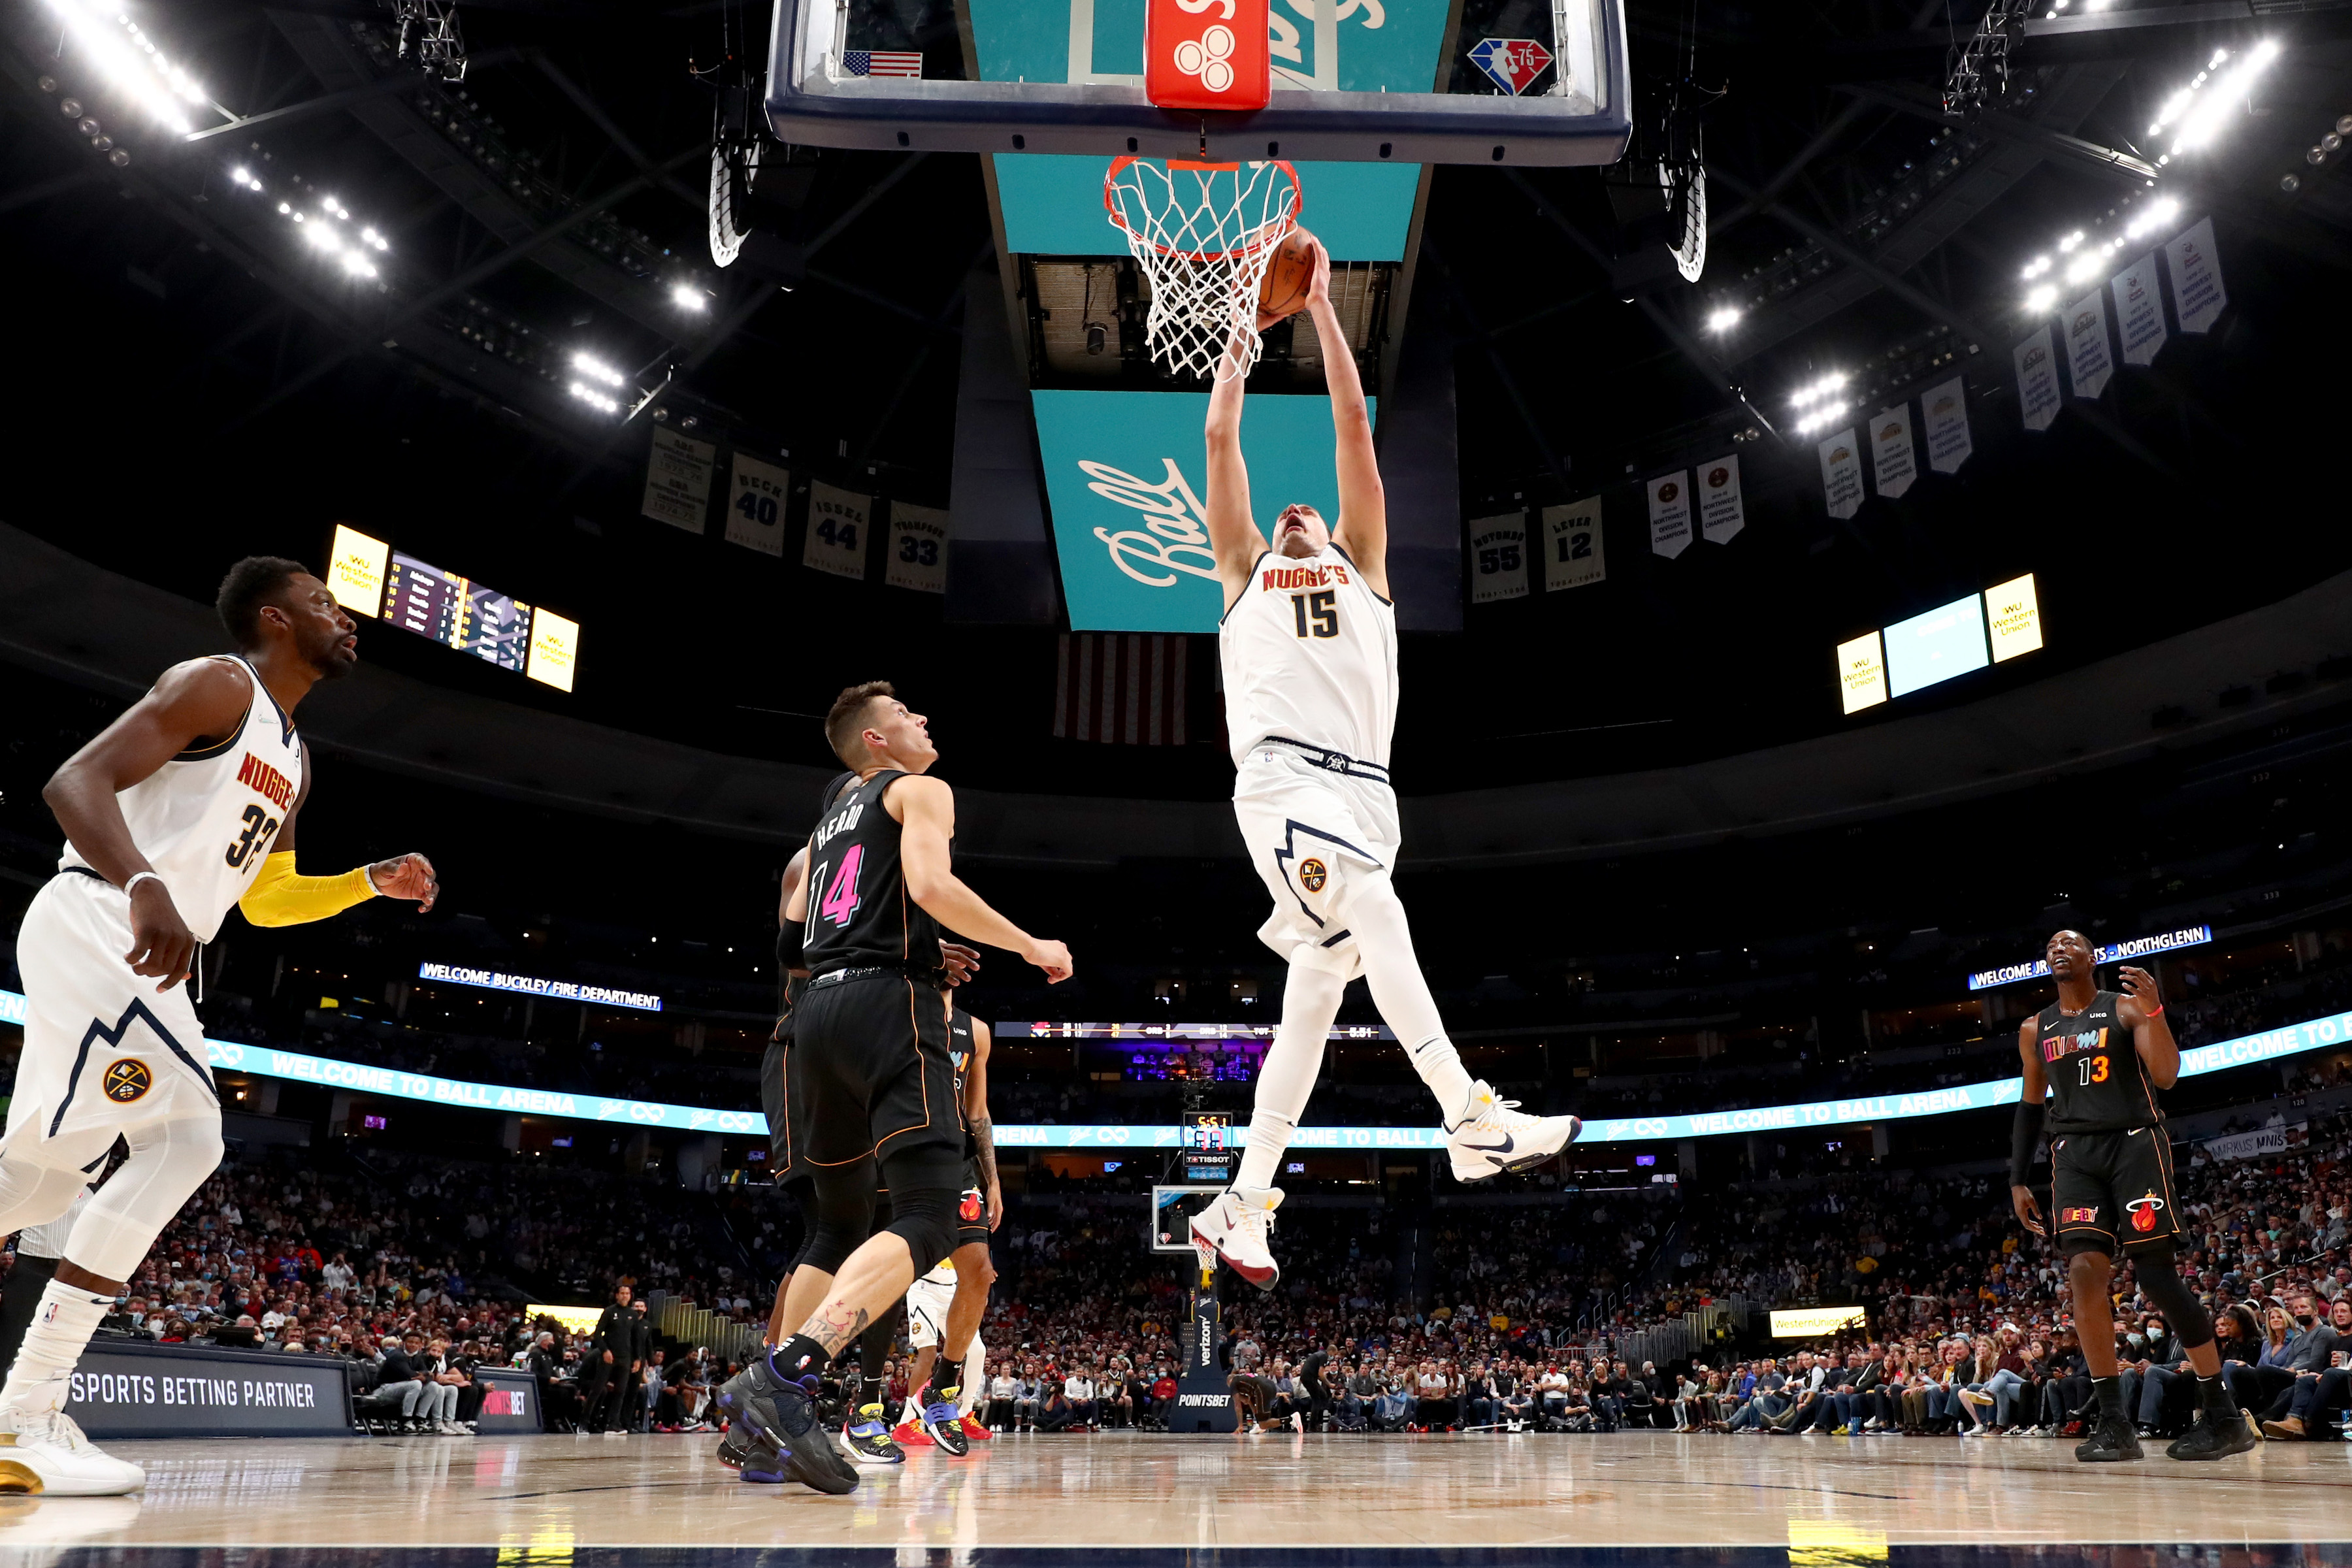 Denver Nuggets center Nikola Jokic dunks the ball during a game against the Miami Heat